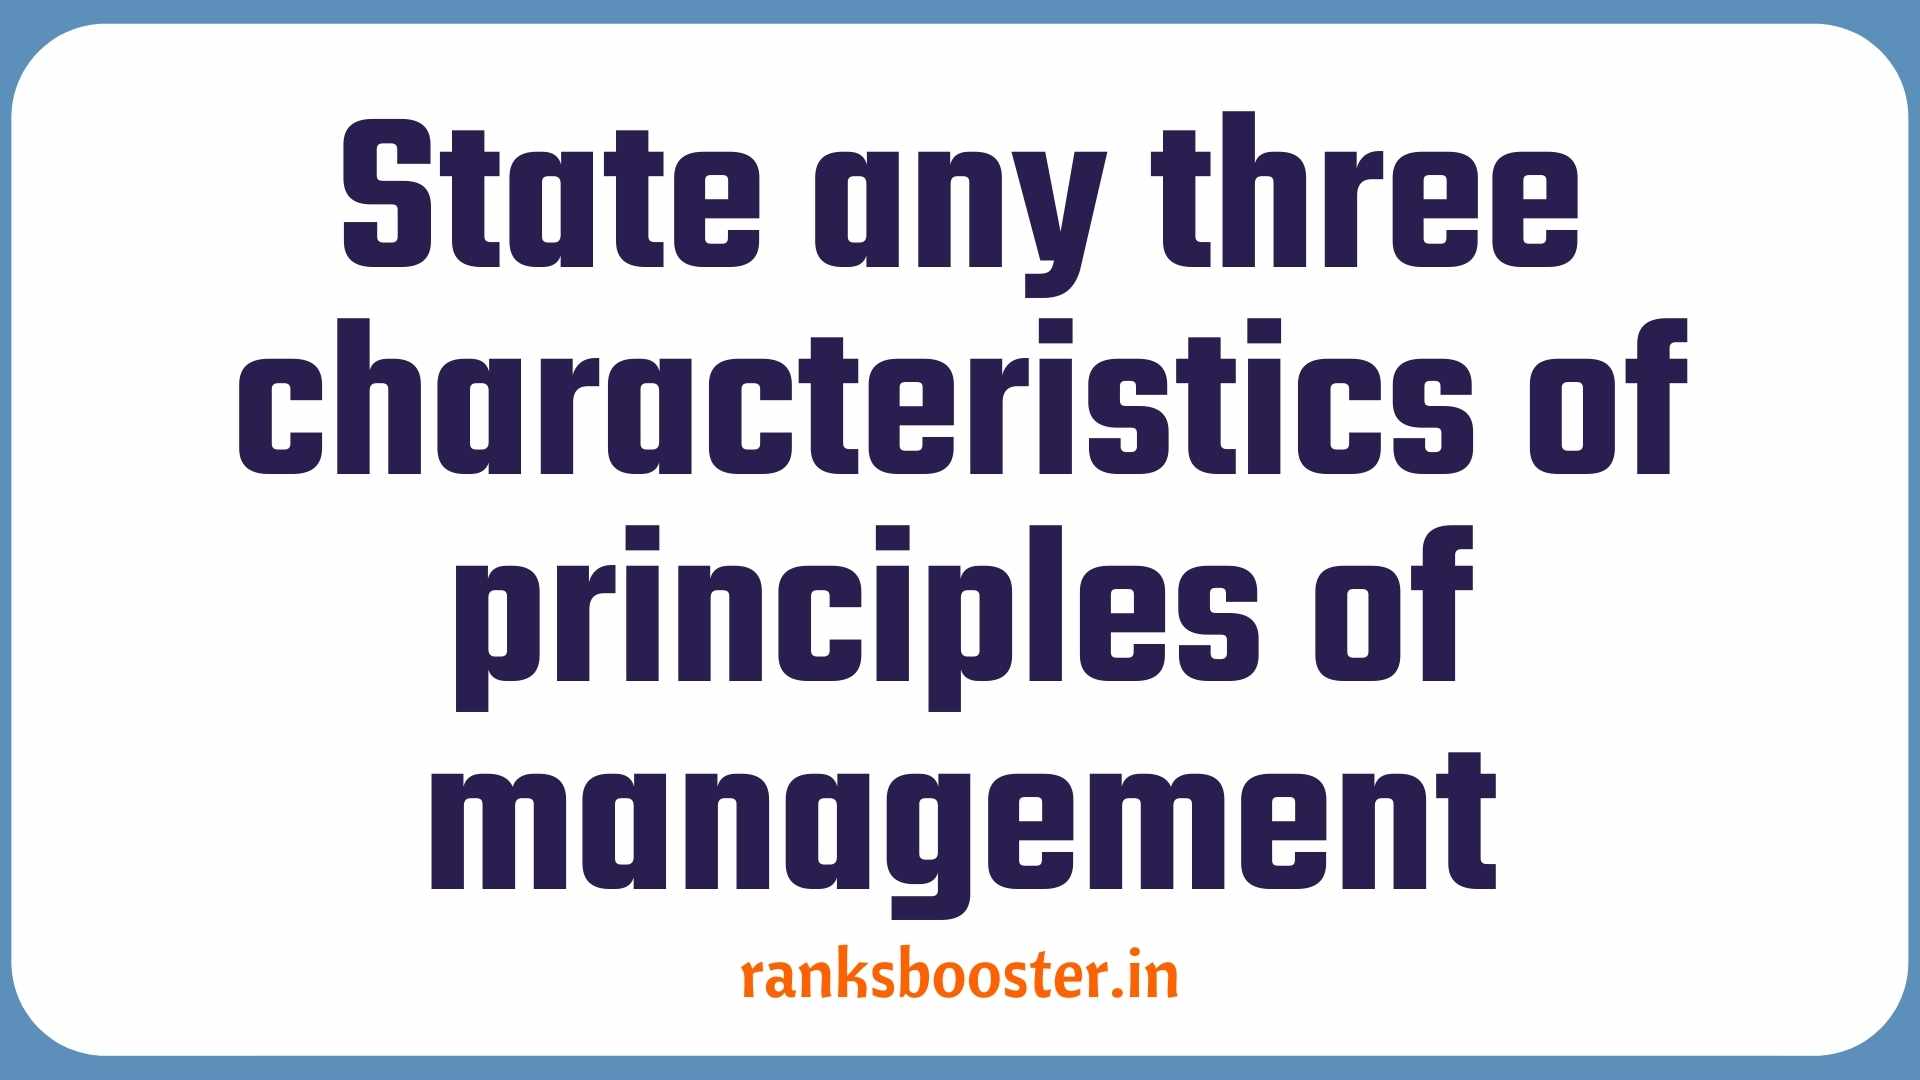 State any three characteristics of principles of management